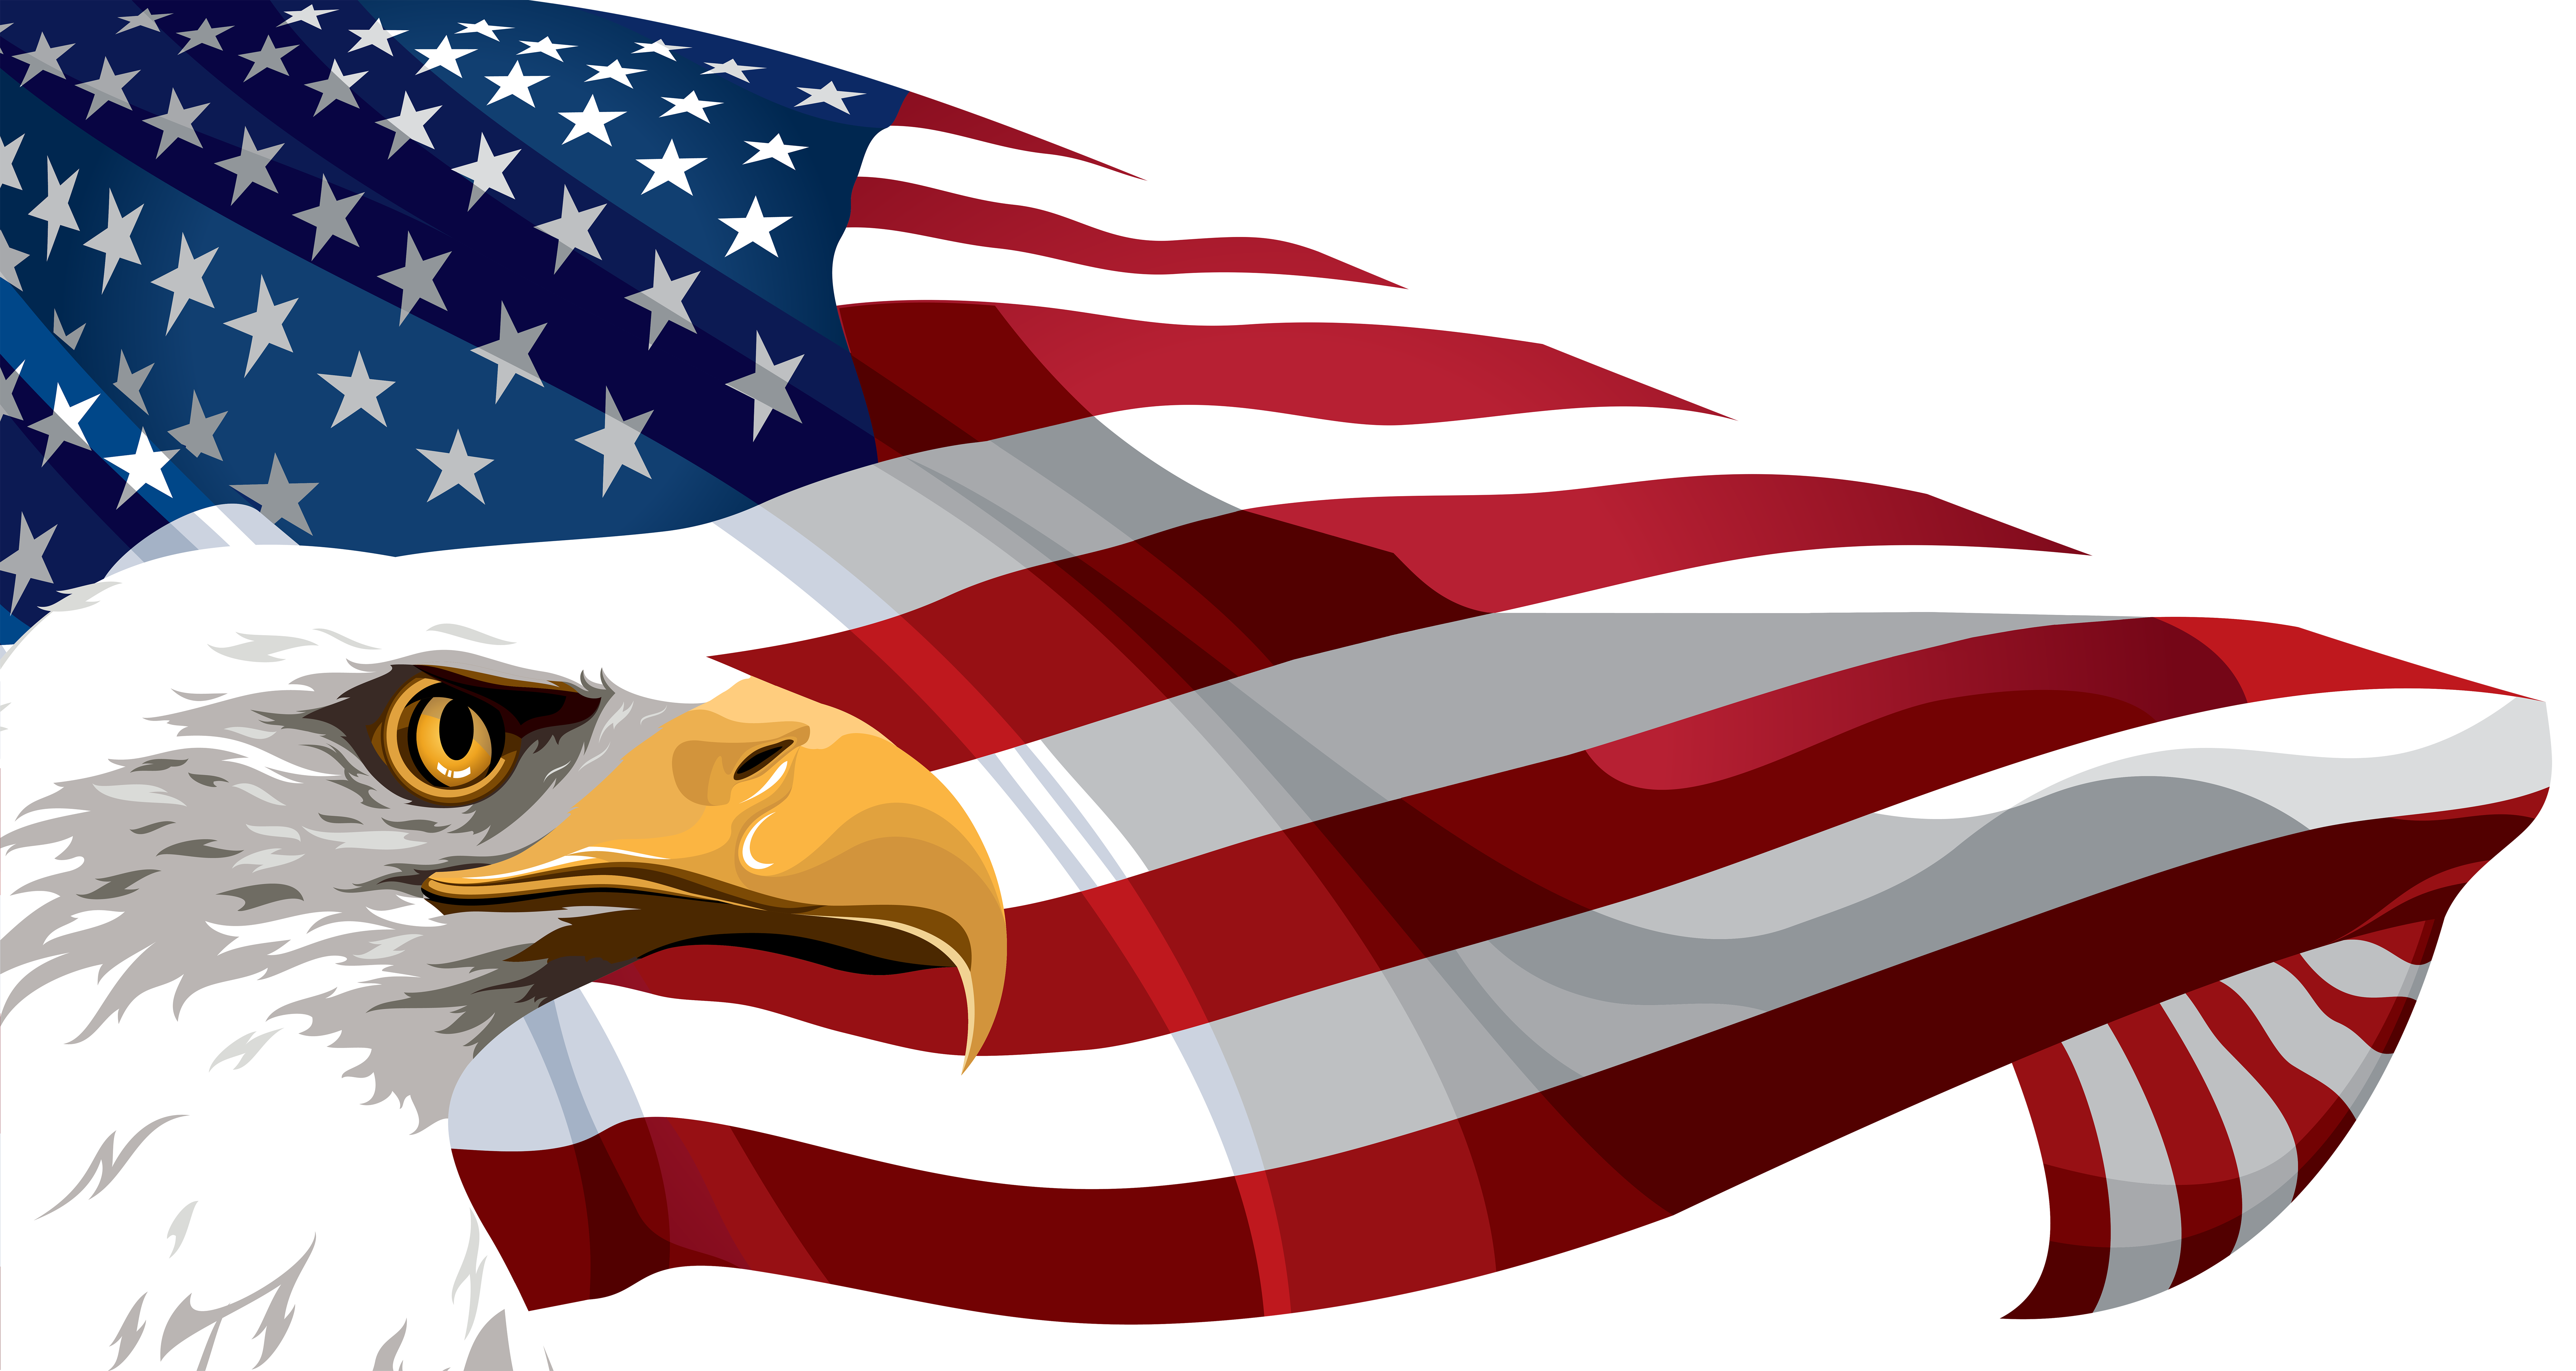 Free Usa Eagle Png, Download Free Usa Eagle Png png images, Free